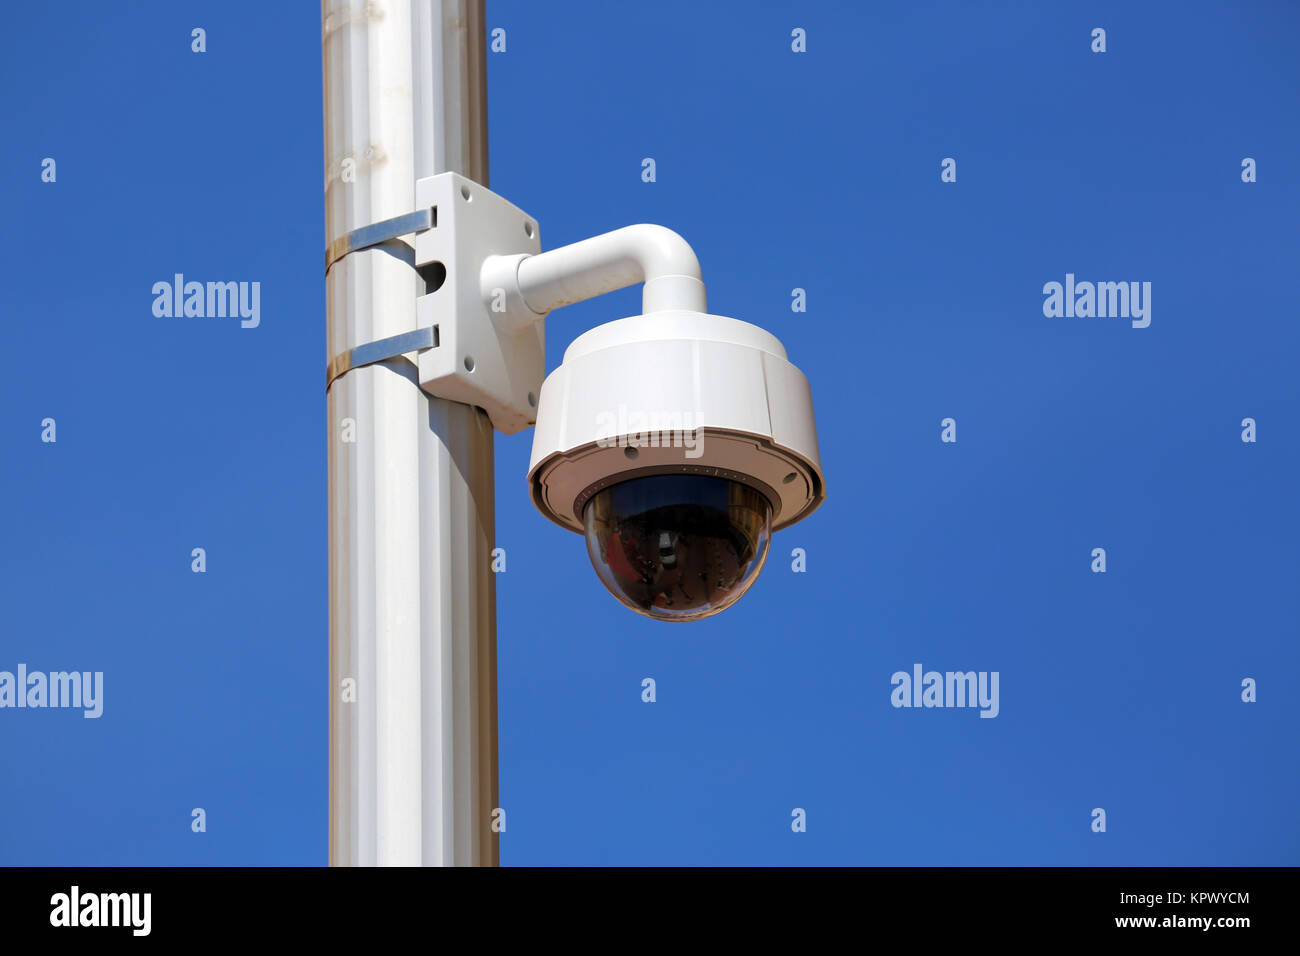 Dome Type Outdoor CCTV Camera on Street Lamp in Nice, France Stock Photo -  Alamy